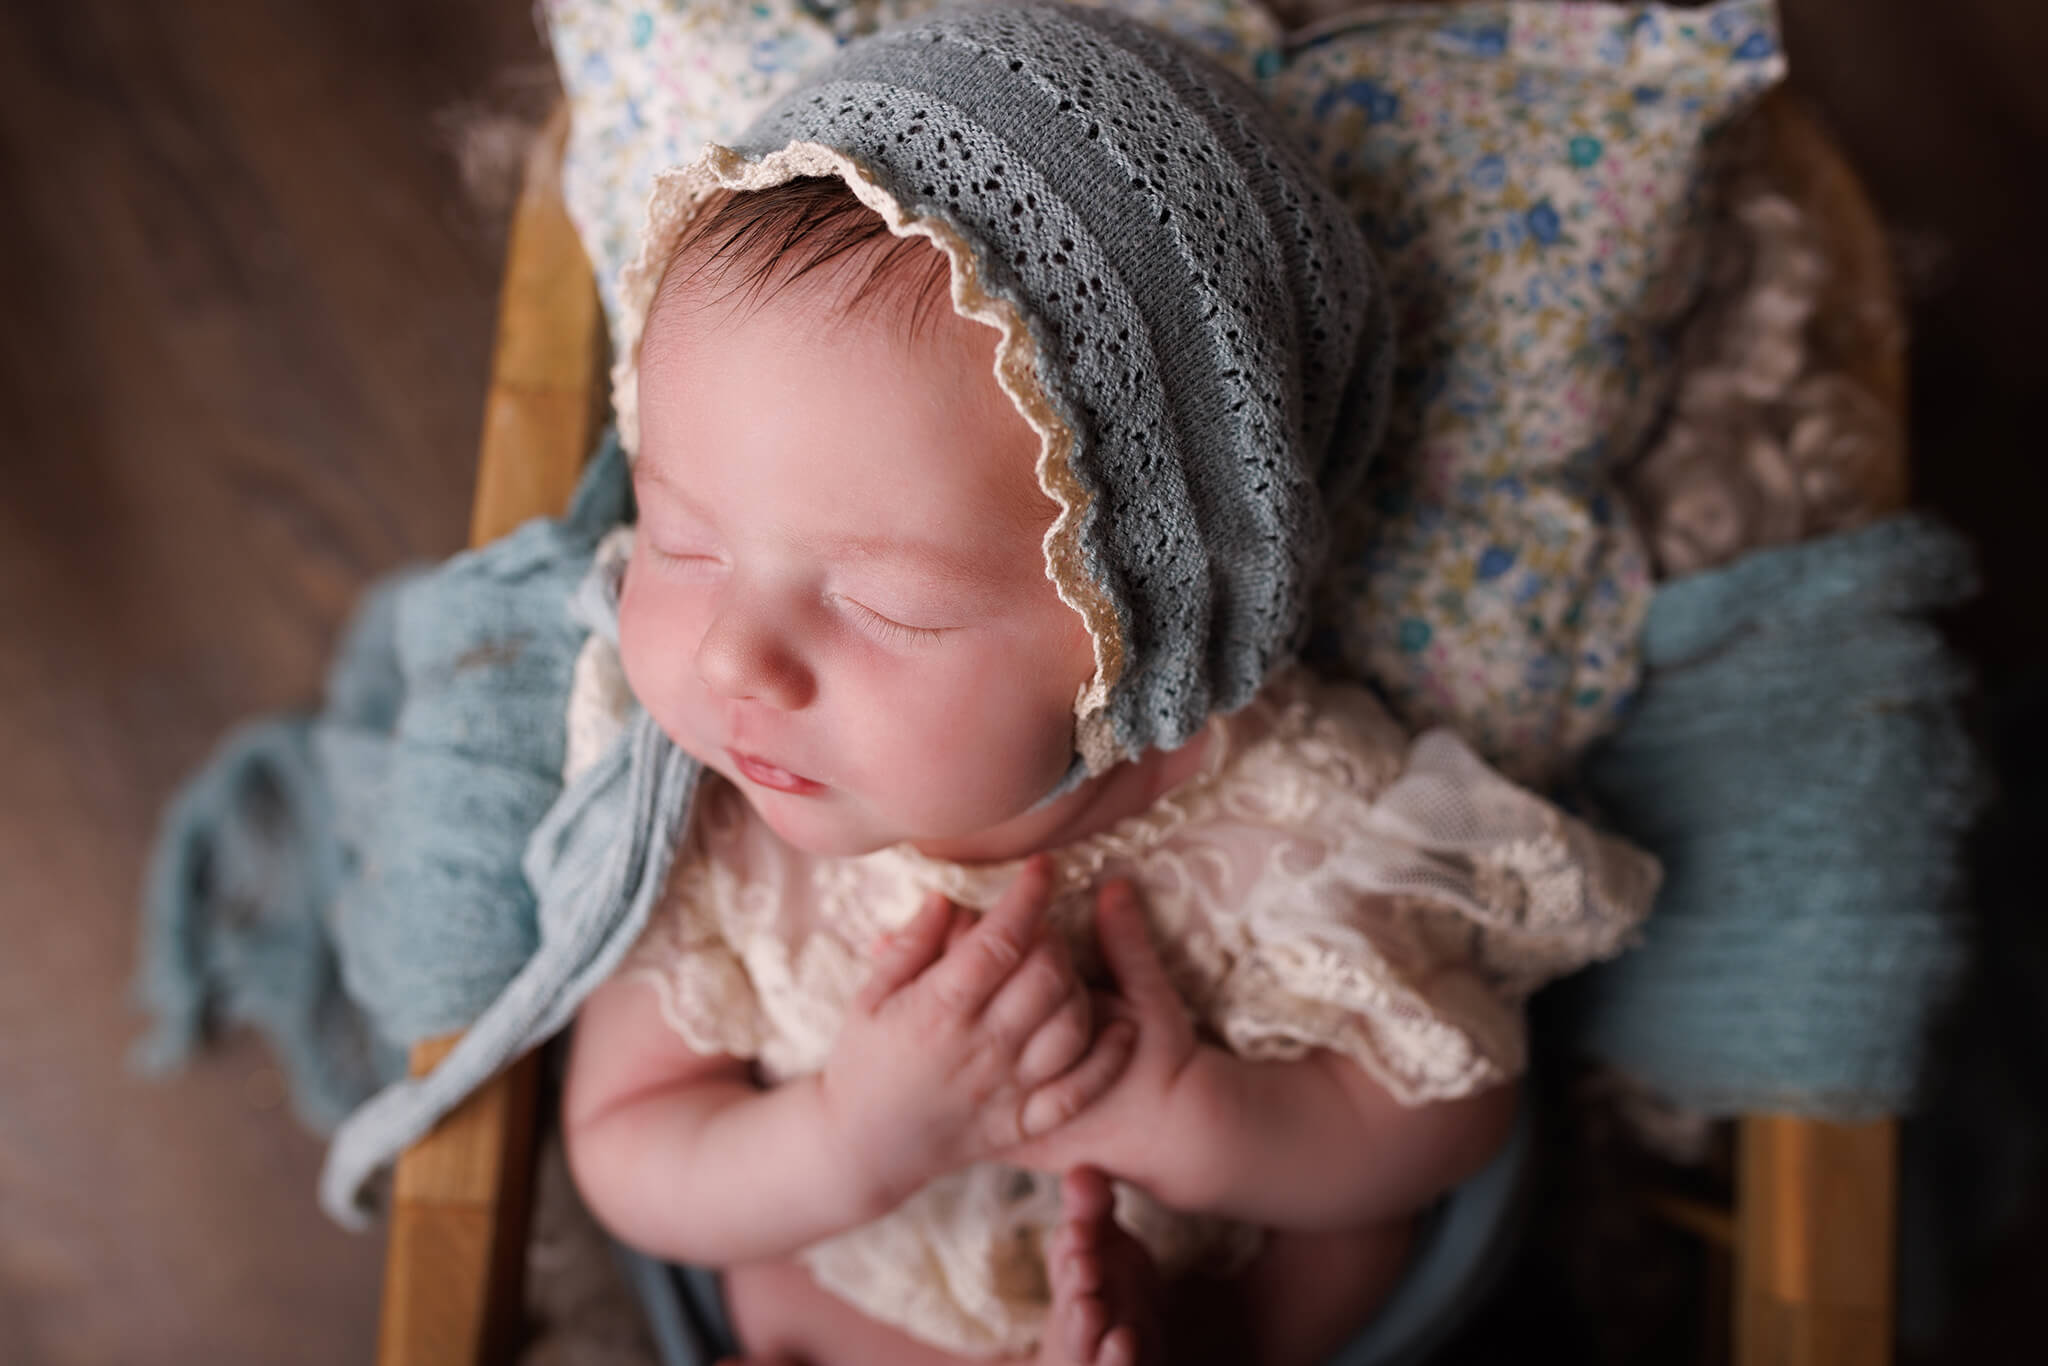 A newborn baby in a lace dress and blue bonnet sleeps in a wooden bed blanchou